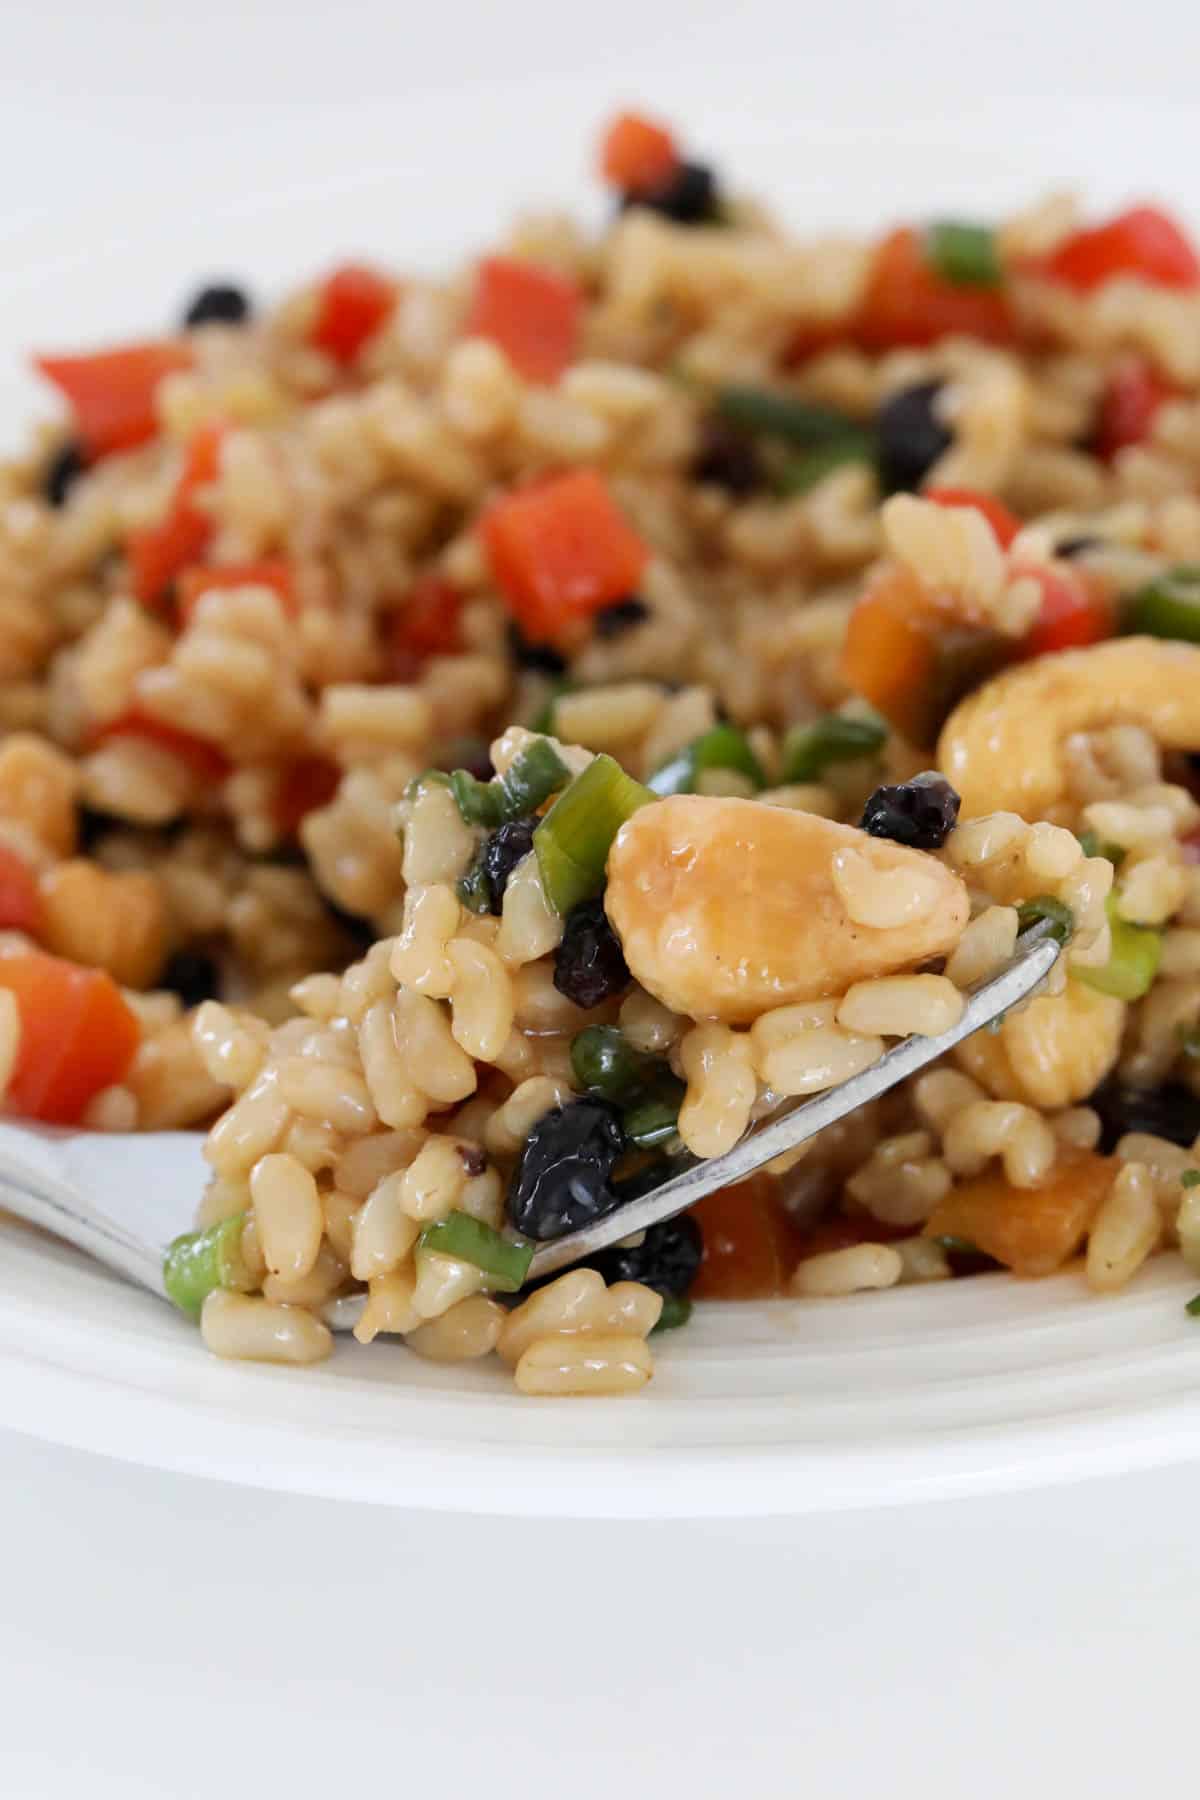 A fork holding a small amount of the rice salad with cashews and currants.